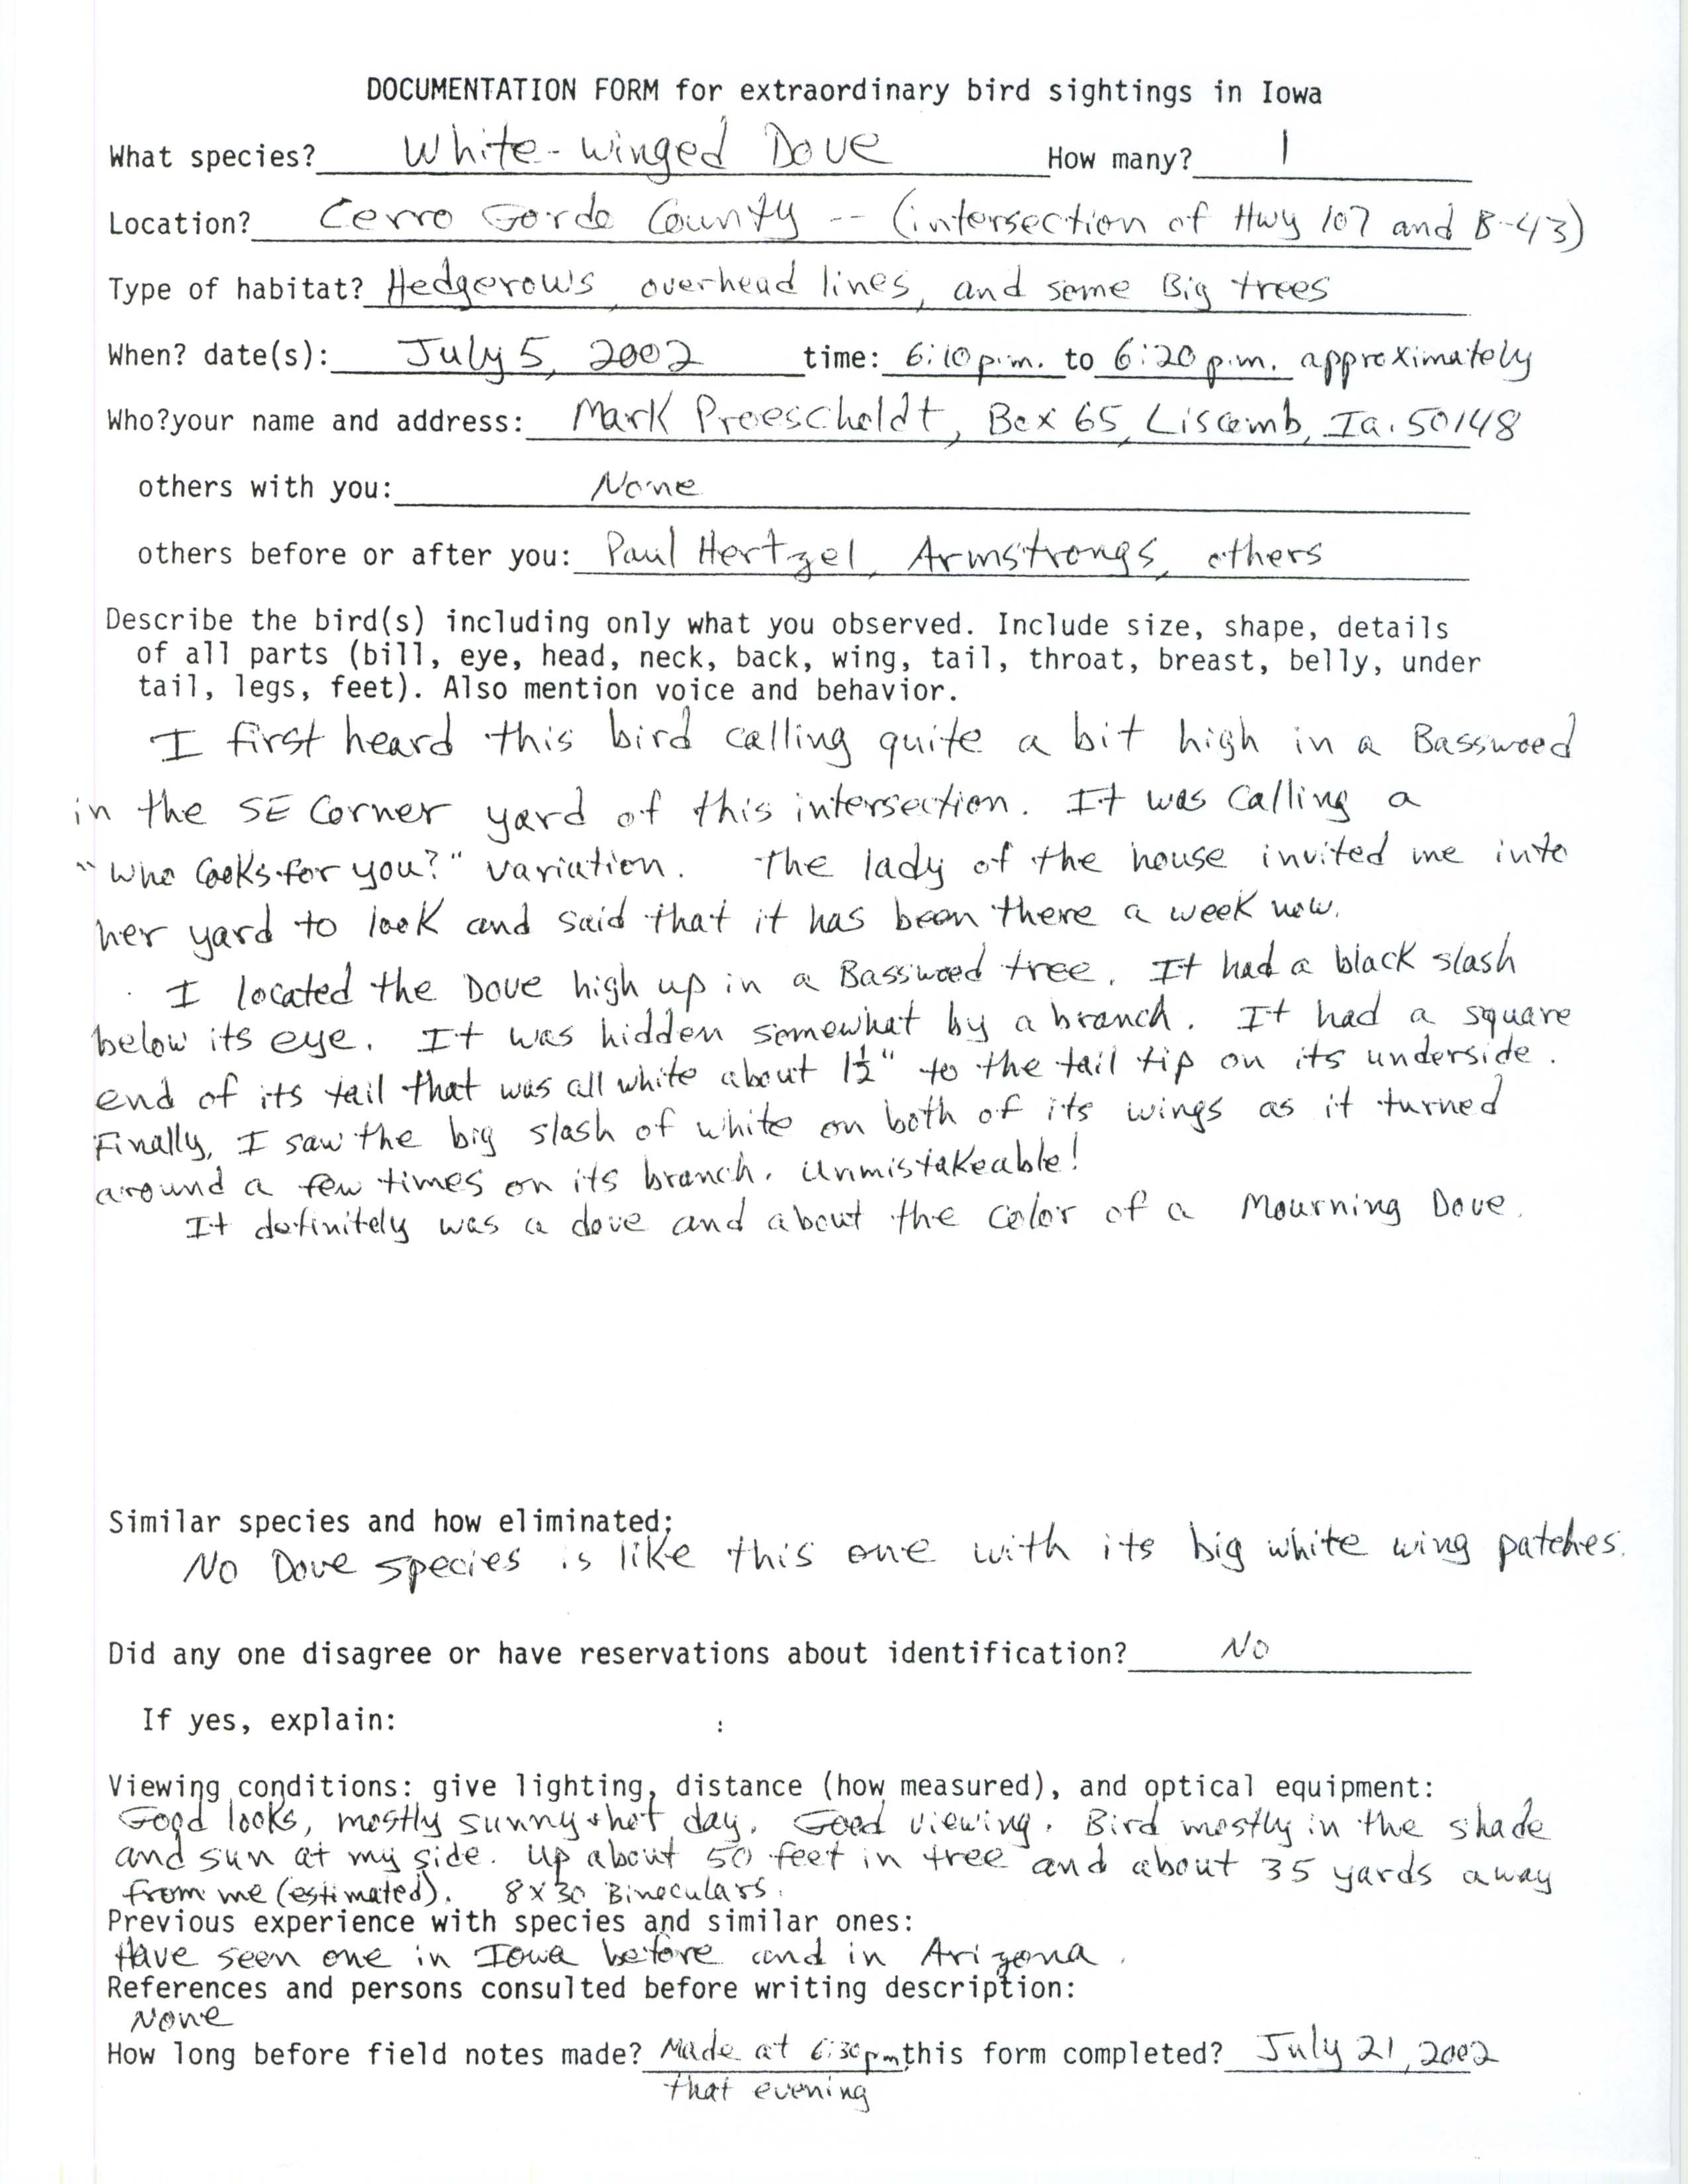 Documentation form for extraordinary bird sightings in Iowa, White-winged Dove, Mark Proescholdt, July 5, 2002